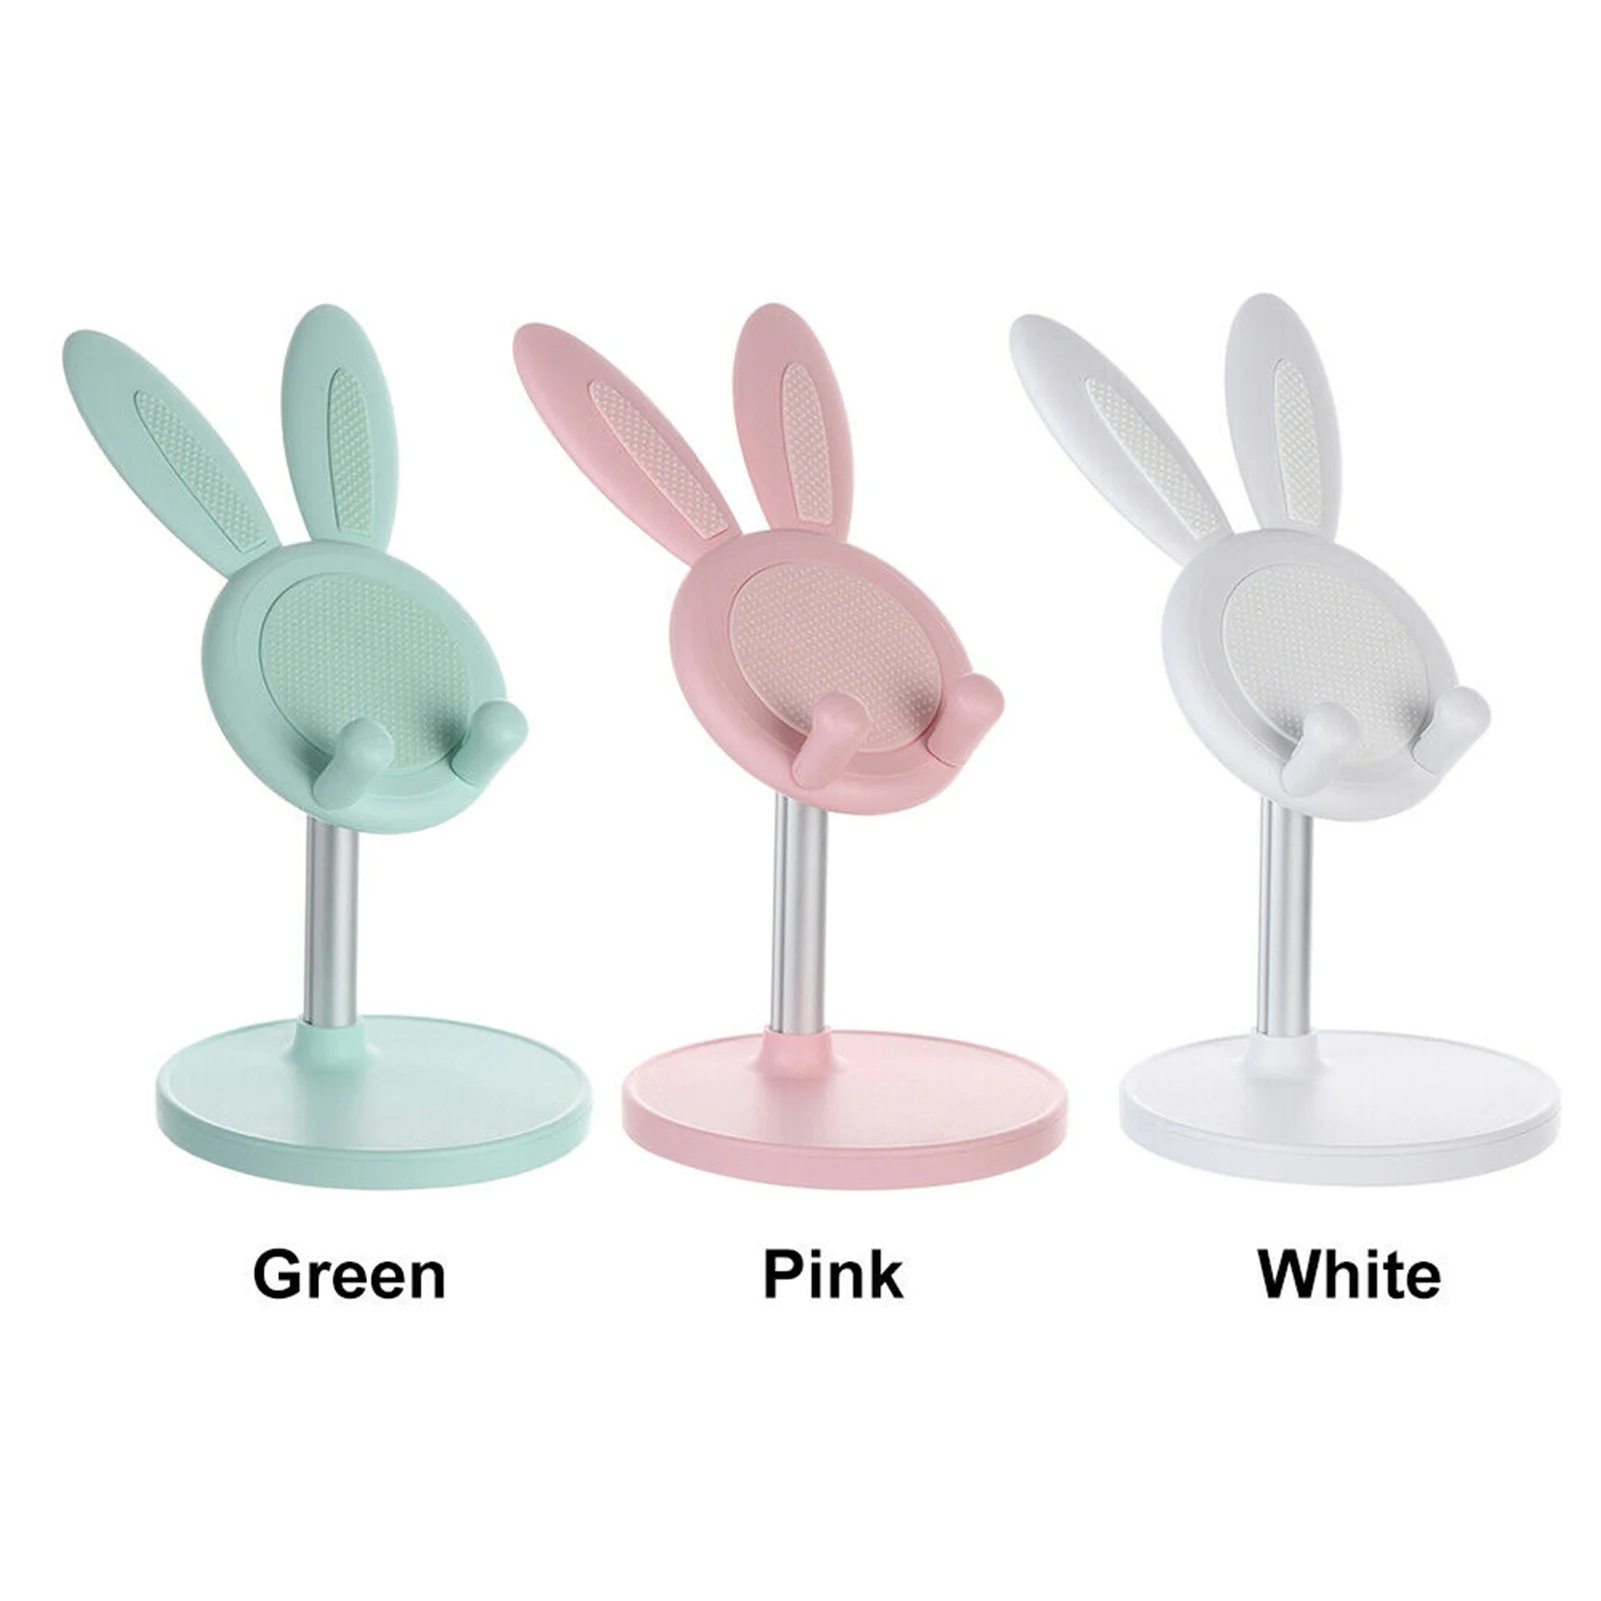 telescopic cartoon rabbit ears mobile phone holder adjustable tablet stand cute bunny desktop rack durable phone accessories free global shipping